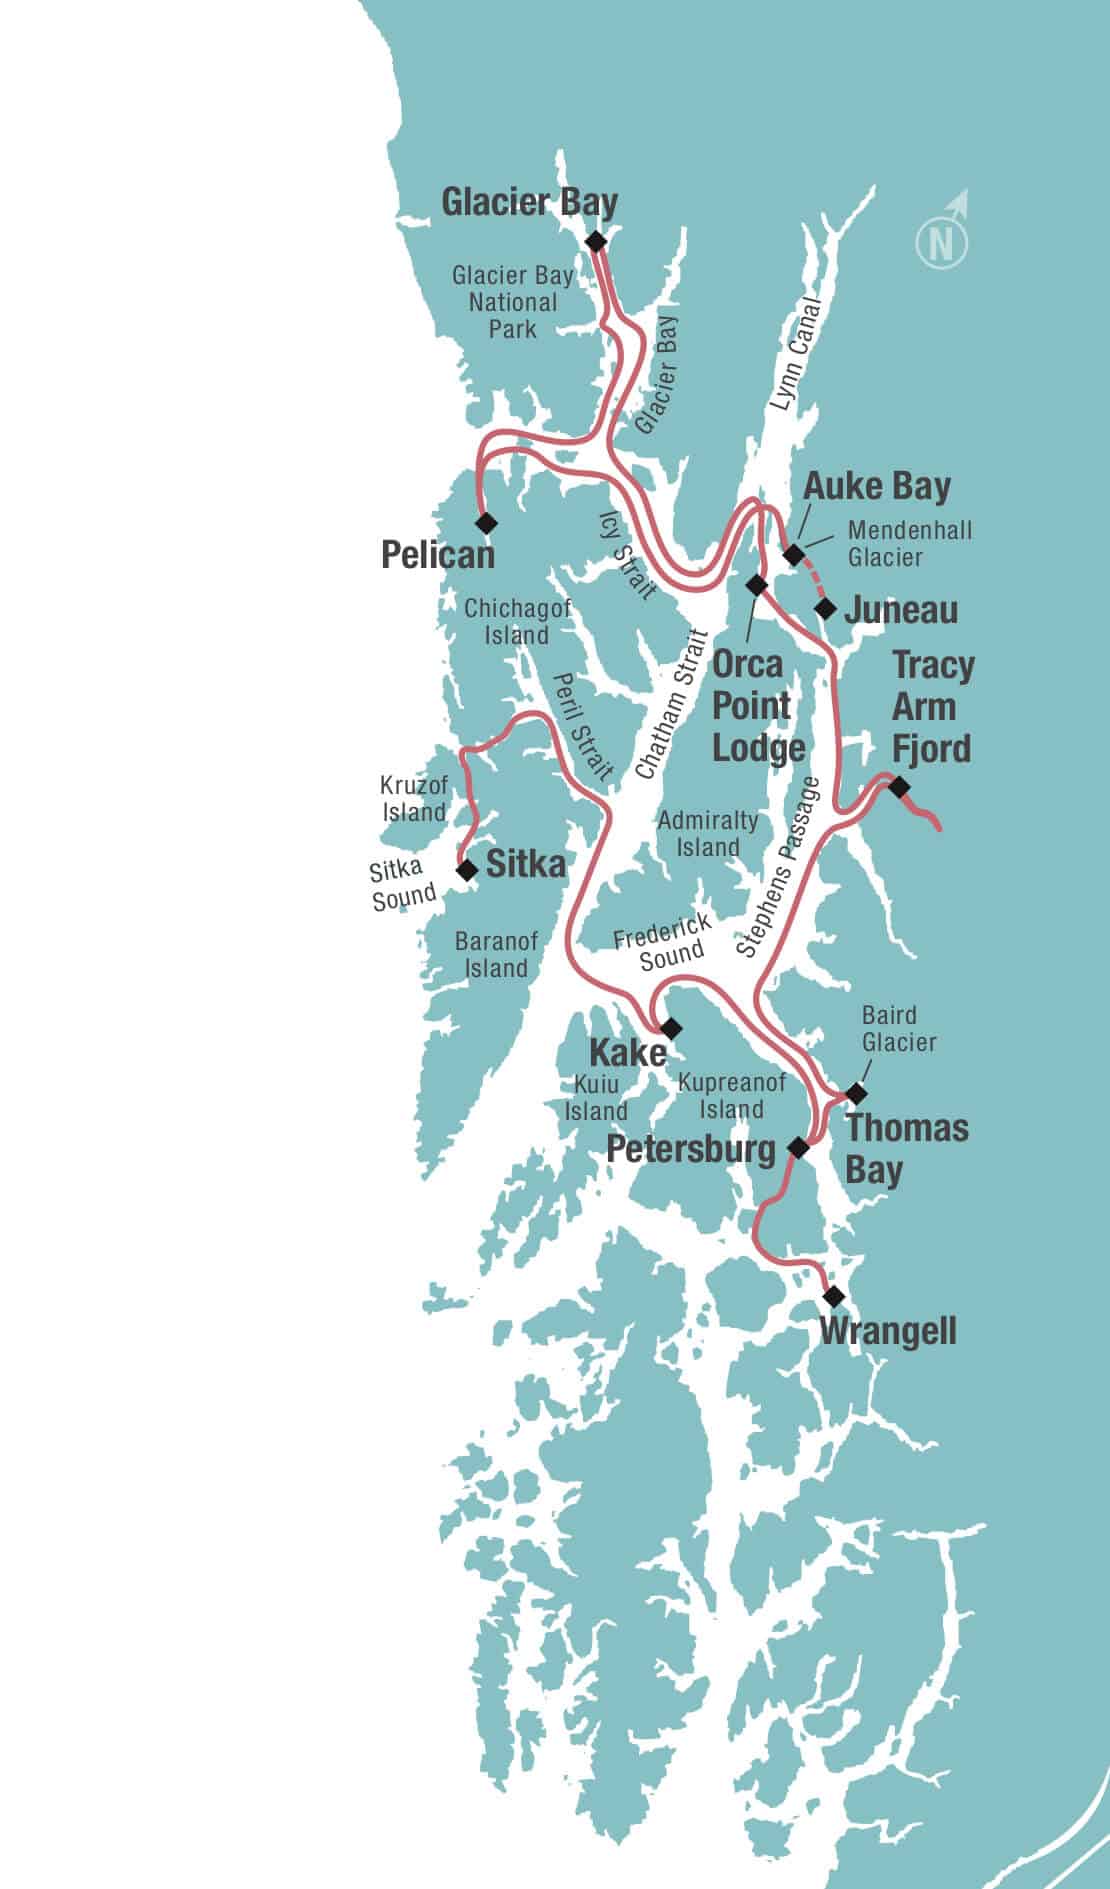 Route map of Glacier Bay & Island Adventure small ship cruise, operating from Sitka to Juneau or reverse, with visits to Wilderness Bay, Kake, Wrangell, Petersburg, Thomas Bay, Baird Glacier, Tracy Arm Fjord, Orca Point Lodge, Glacier Bay National Park, Lisianski Inlet & Pelican.